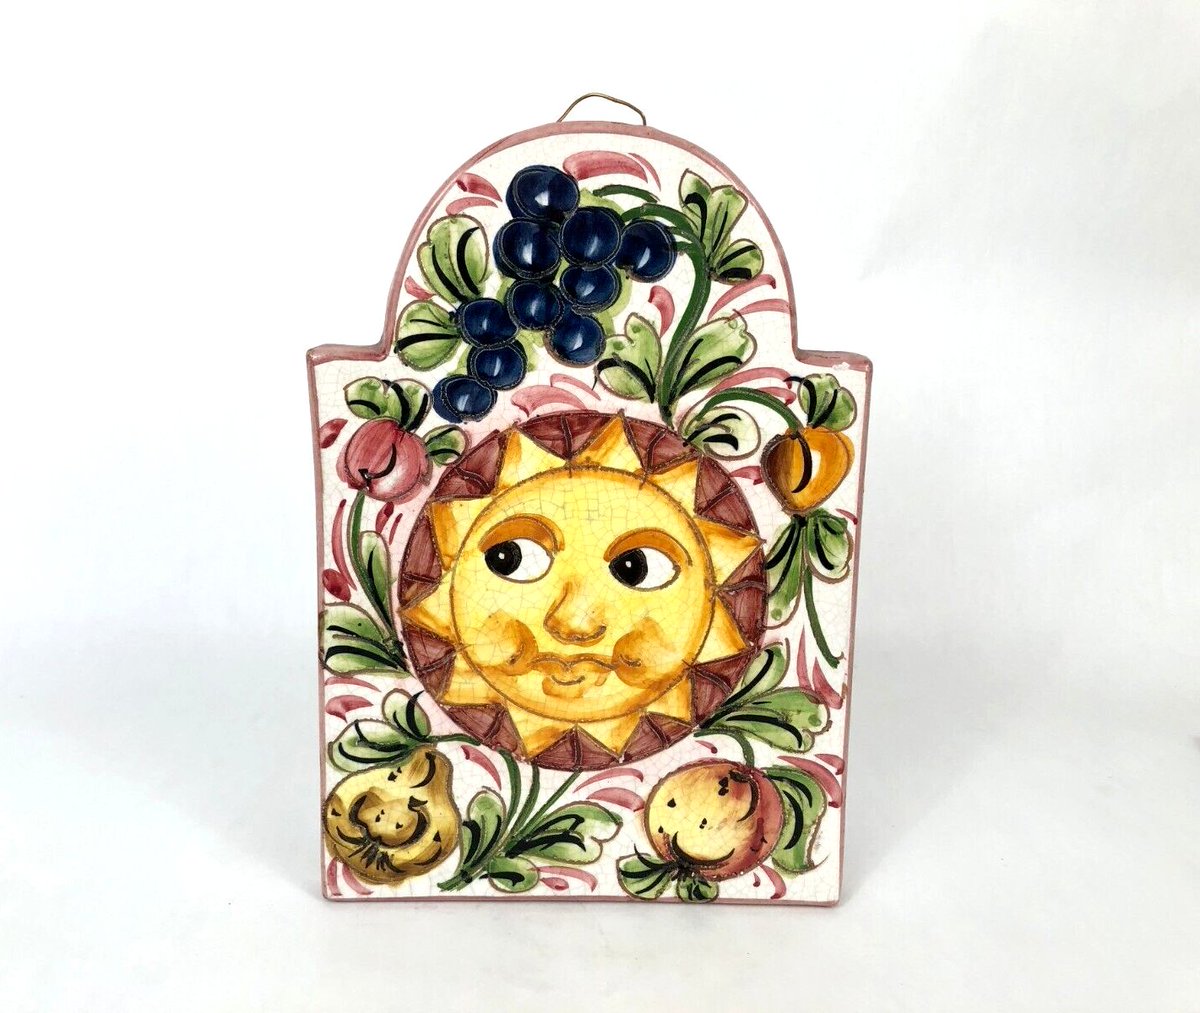 Check out Italian Ceramic Majolica Tile Hand Painted Smiling Sun Design EXC Made in Italy ebay.com/itm/4037396393…

#majolicatile #italiantile #madeinitaly #decorativetile #handpaintedtile #roguesestatejewelry